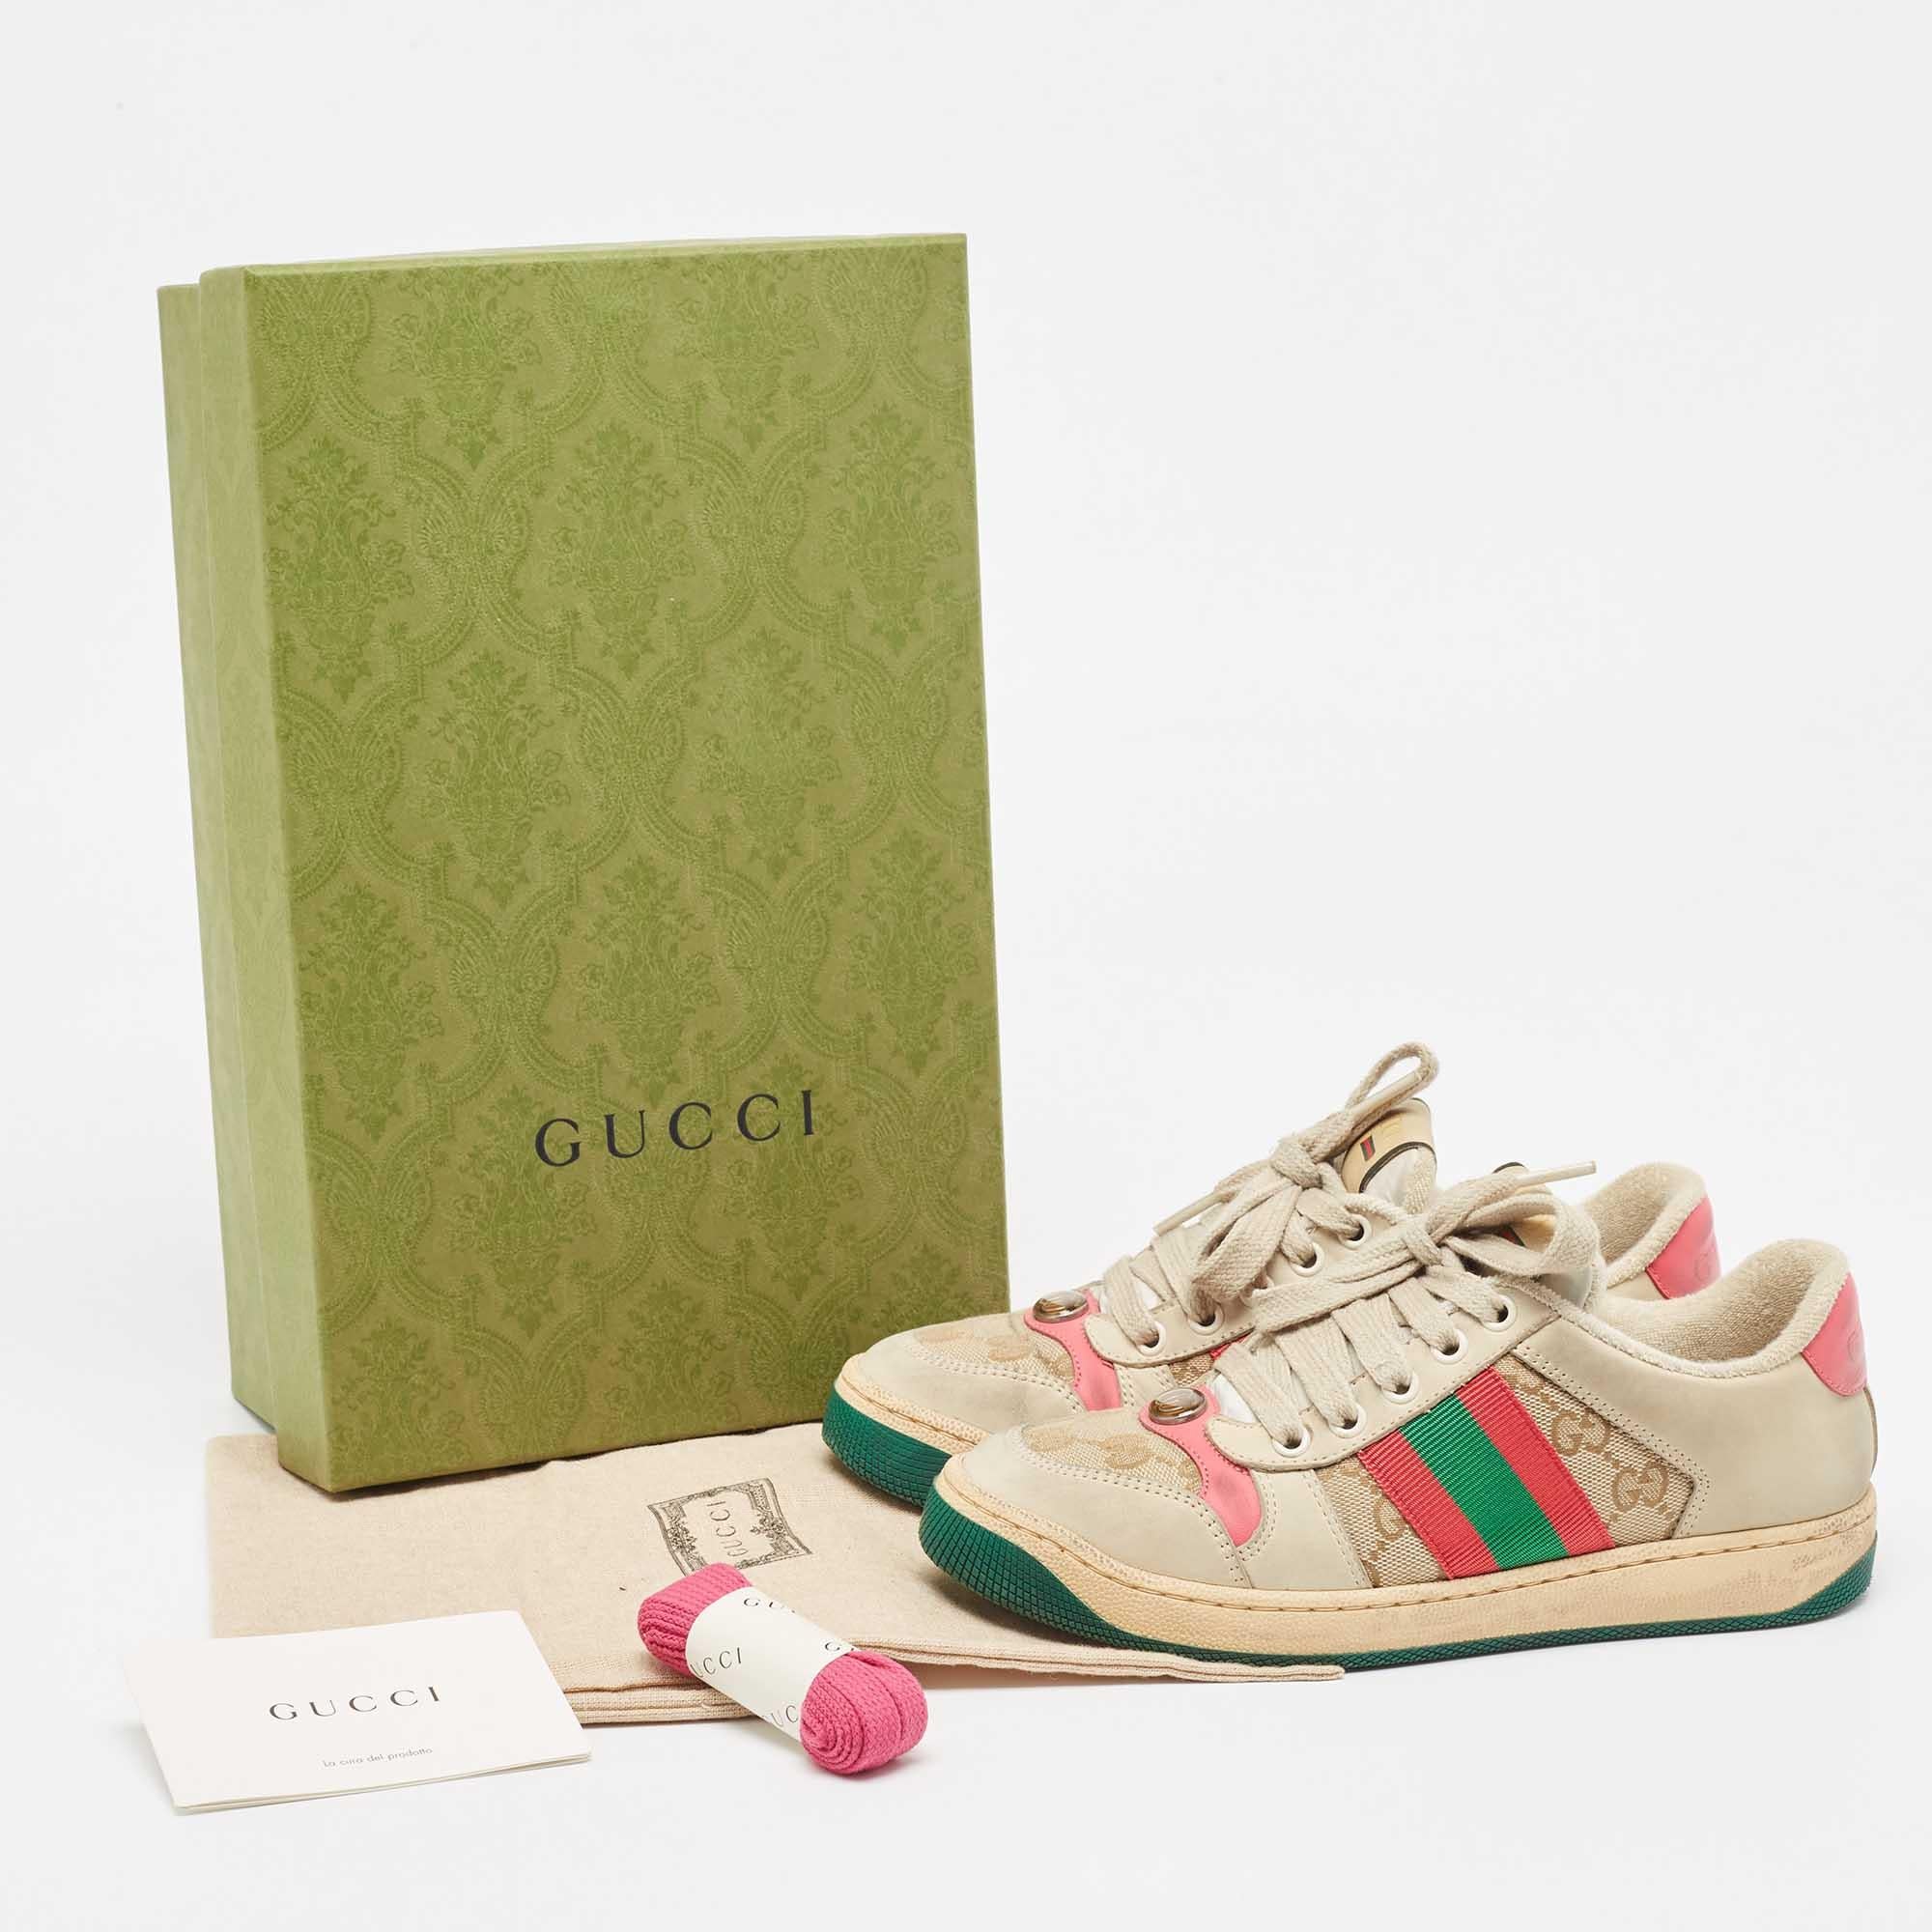 Gucci Grey/Pink Nubuck Leather Screener Sneakers Size 34 4